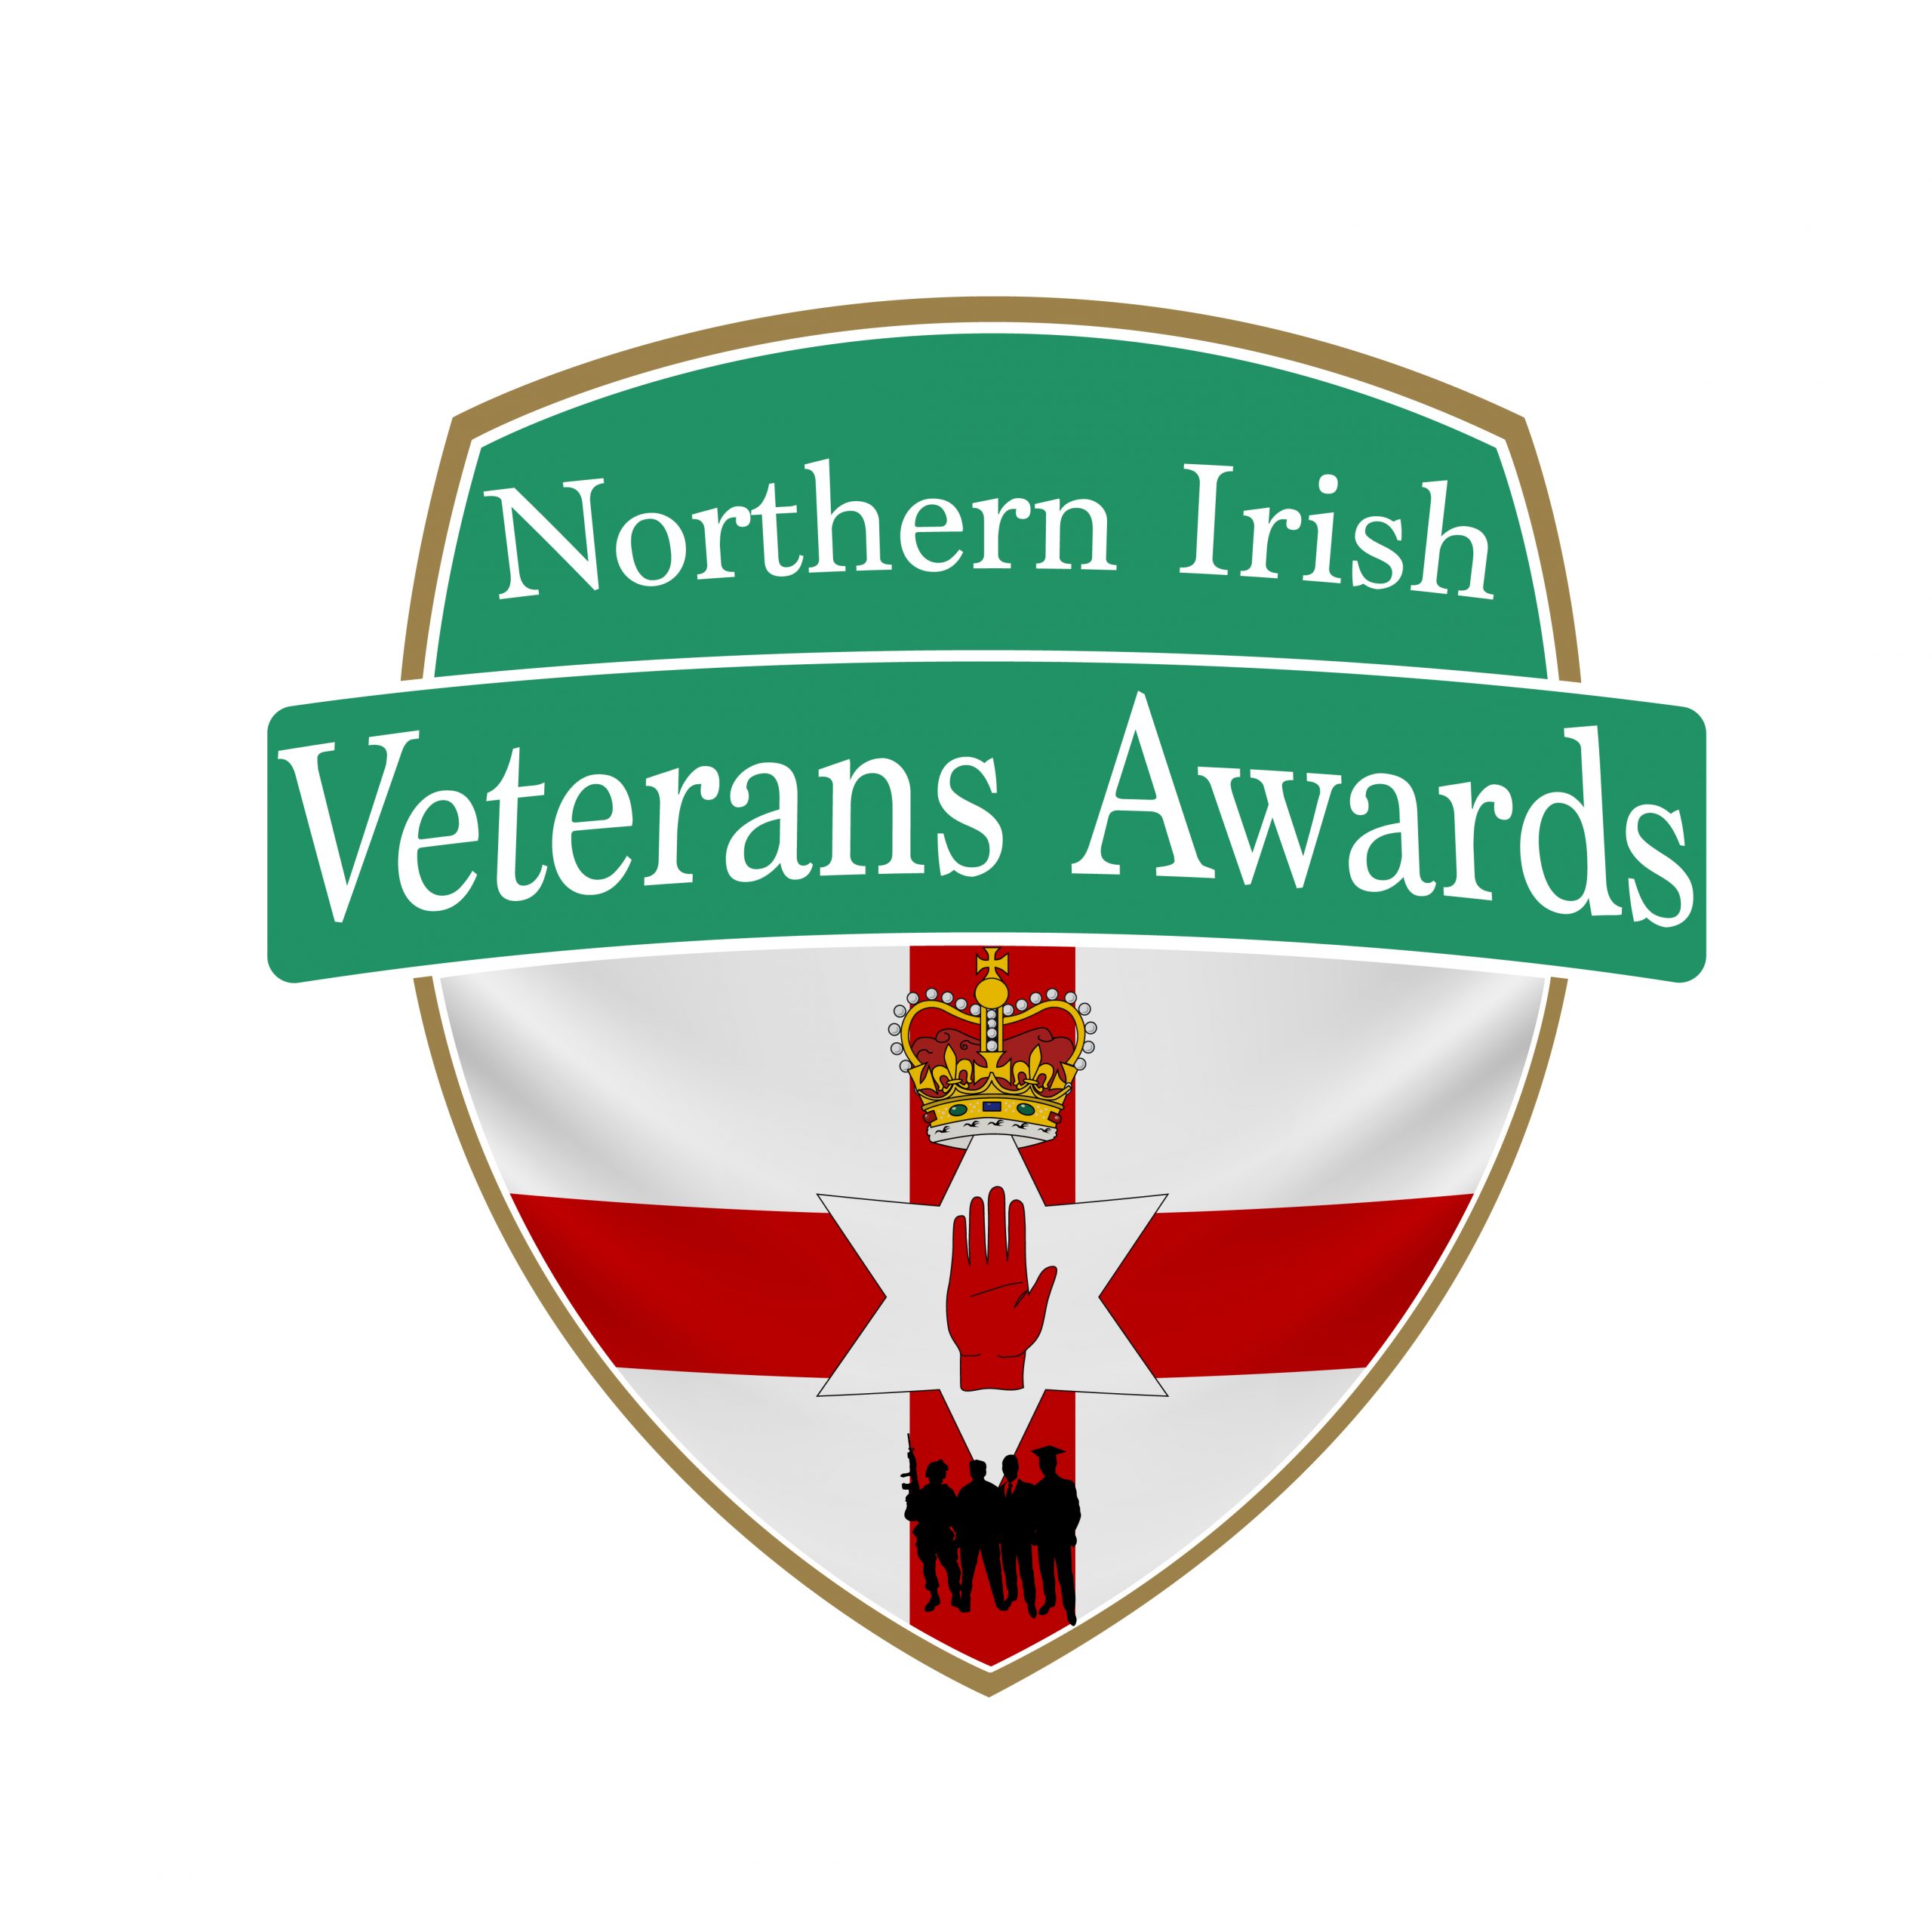 Pathfinder Becomes Official Media Partner For The Northern Irish Veterans Awards